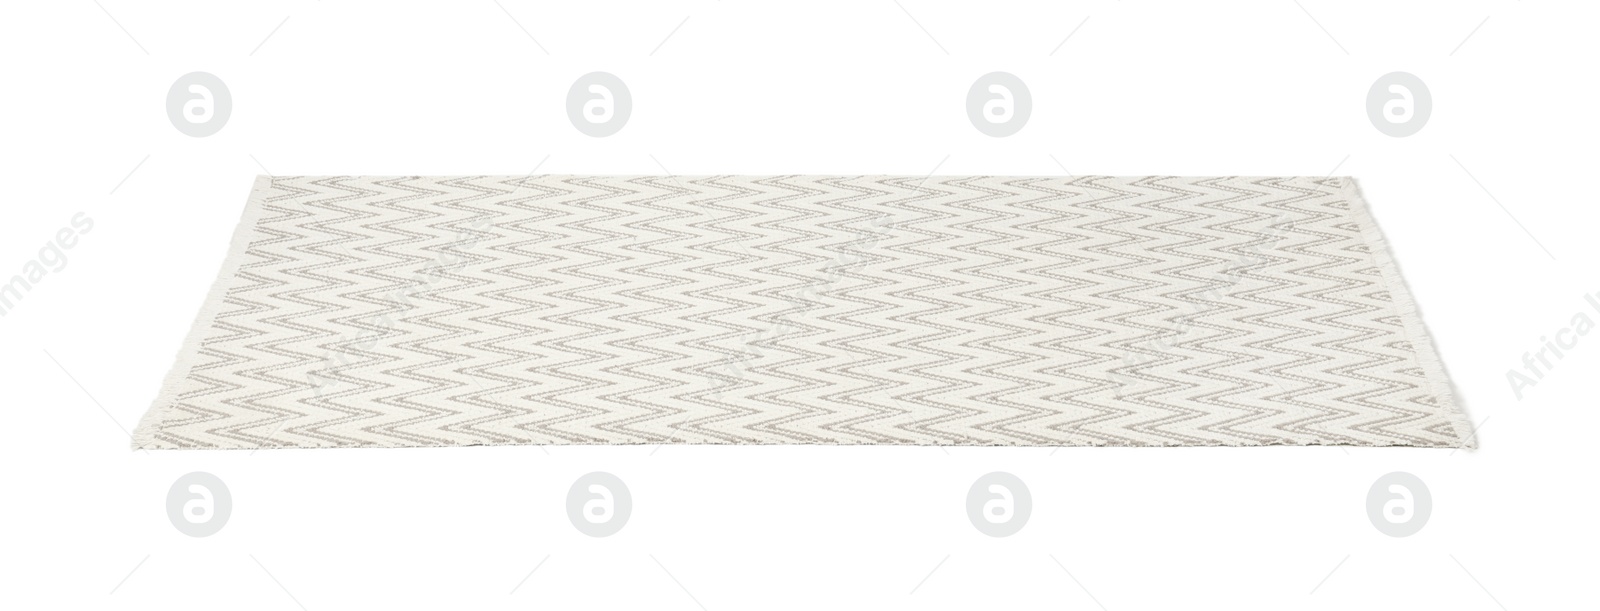 Photo of Light carpet with geometric pattern isolated on white